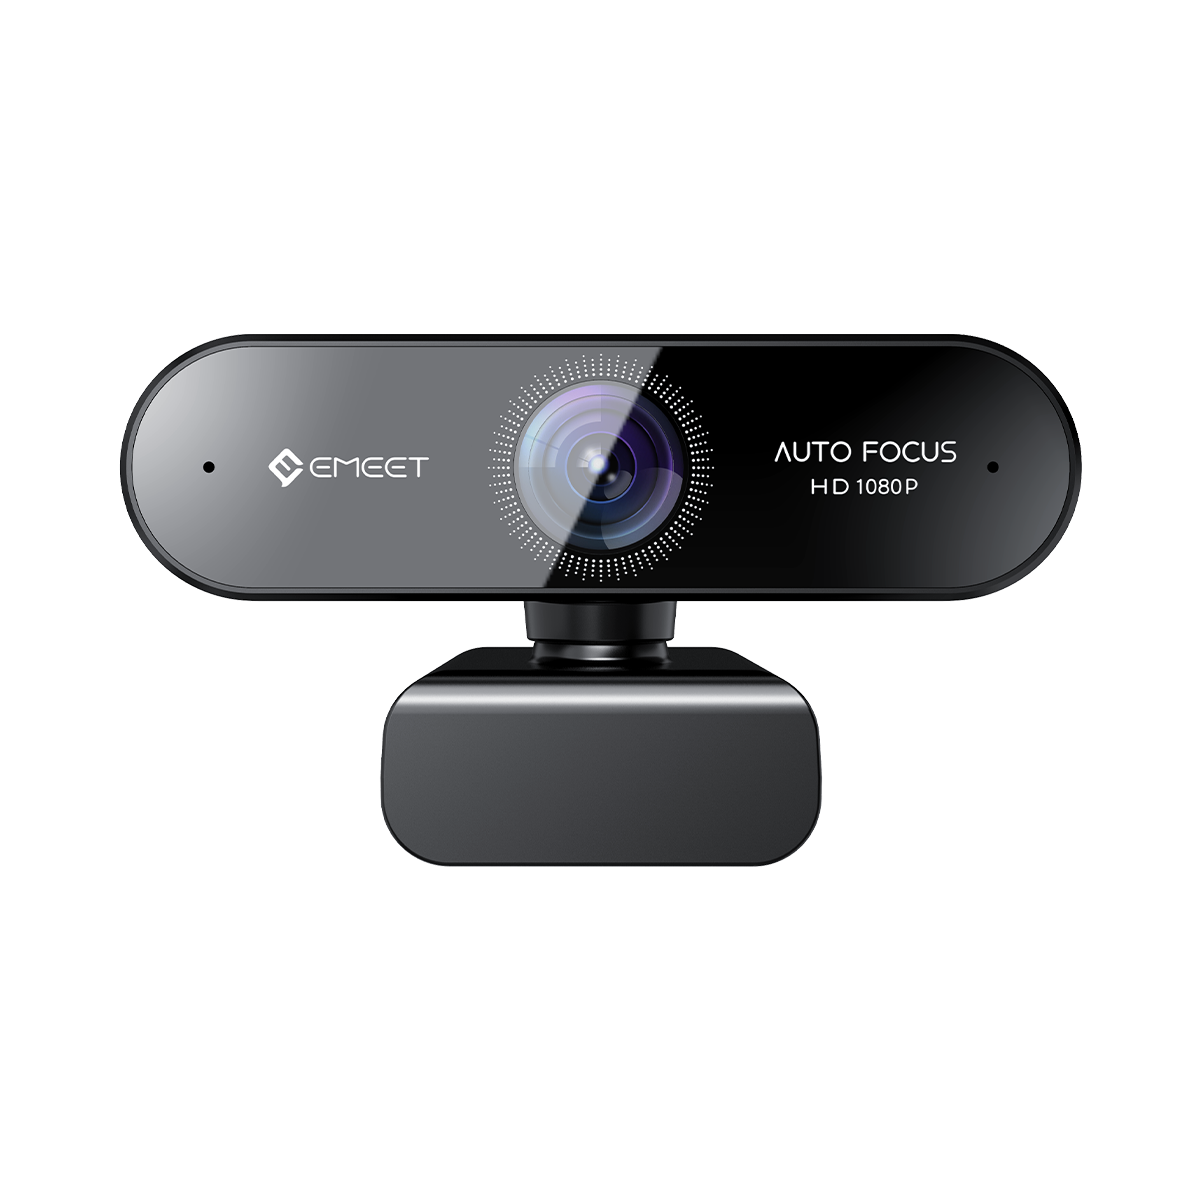 1080P Webcam with Microphone, C960 Web Camera, 2 Mics Streaming Webcam,  90°View Computer Camera, Plug and Play USB Webcam for Online